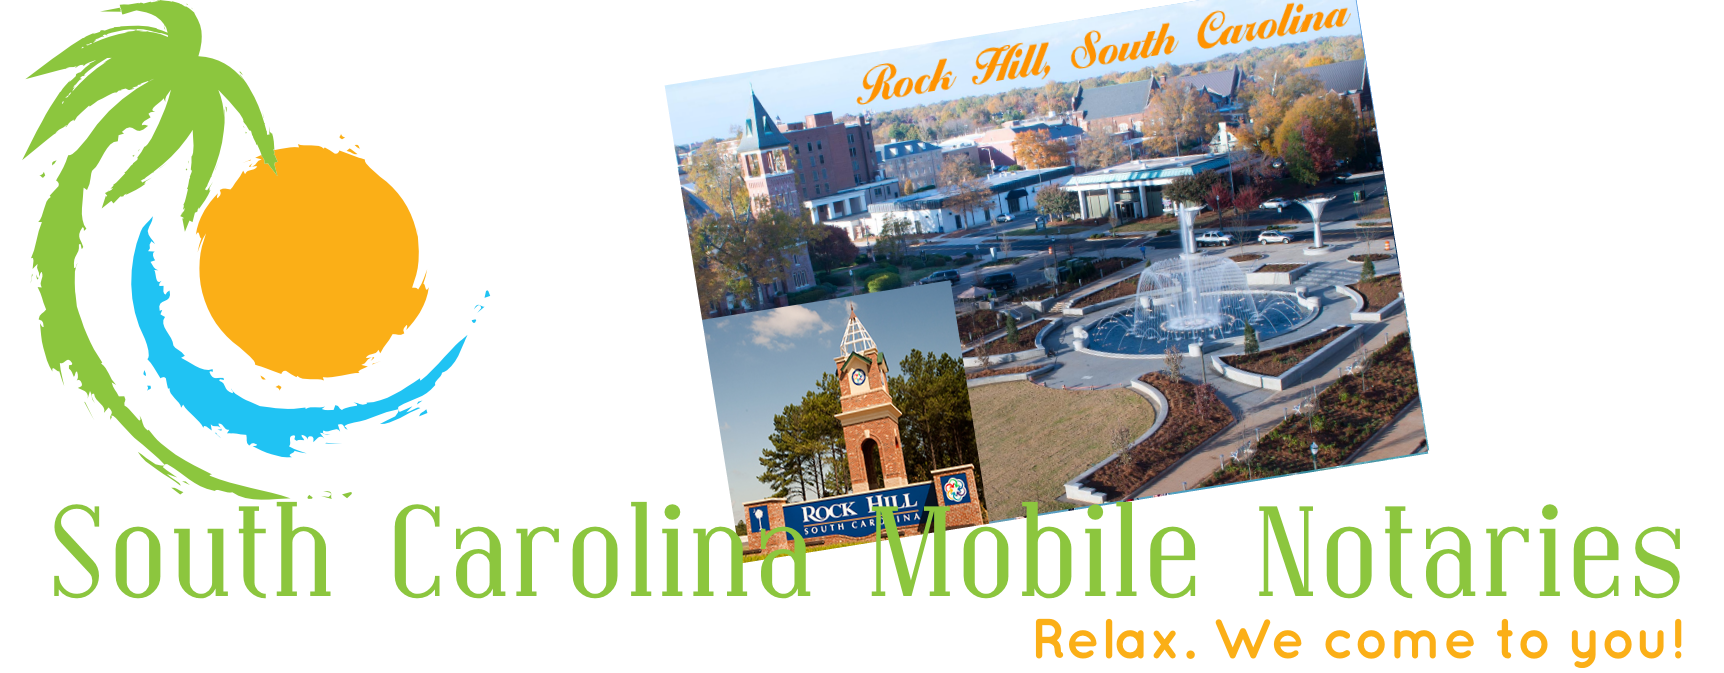 Rock Hill South Carolna Mobile Notaries; Rock Hill mobile notary service; traveling notary public Rock Hill; Rock Hill wedding officiants; signing agents Rock Hill, SC